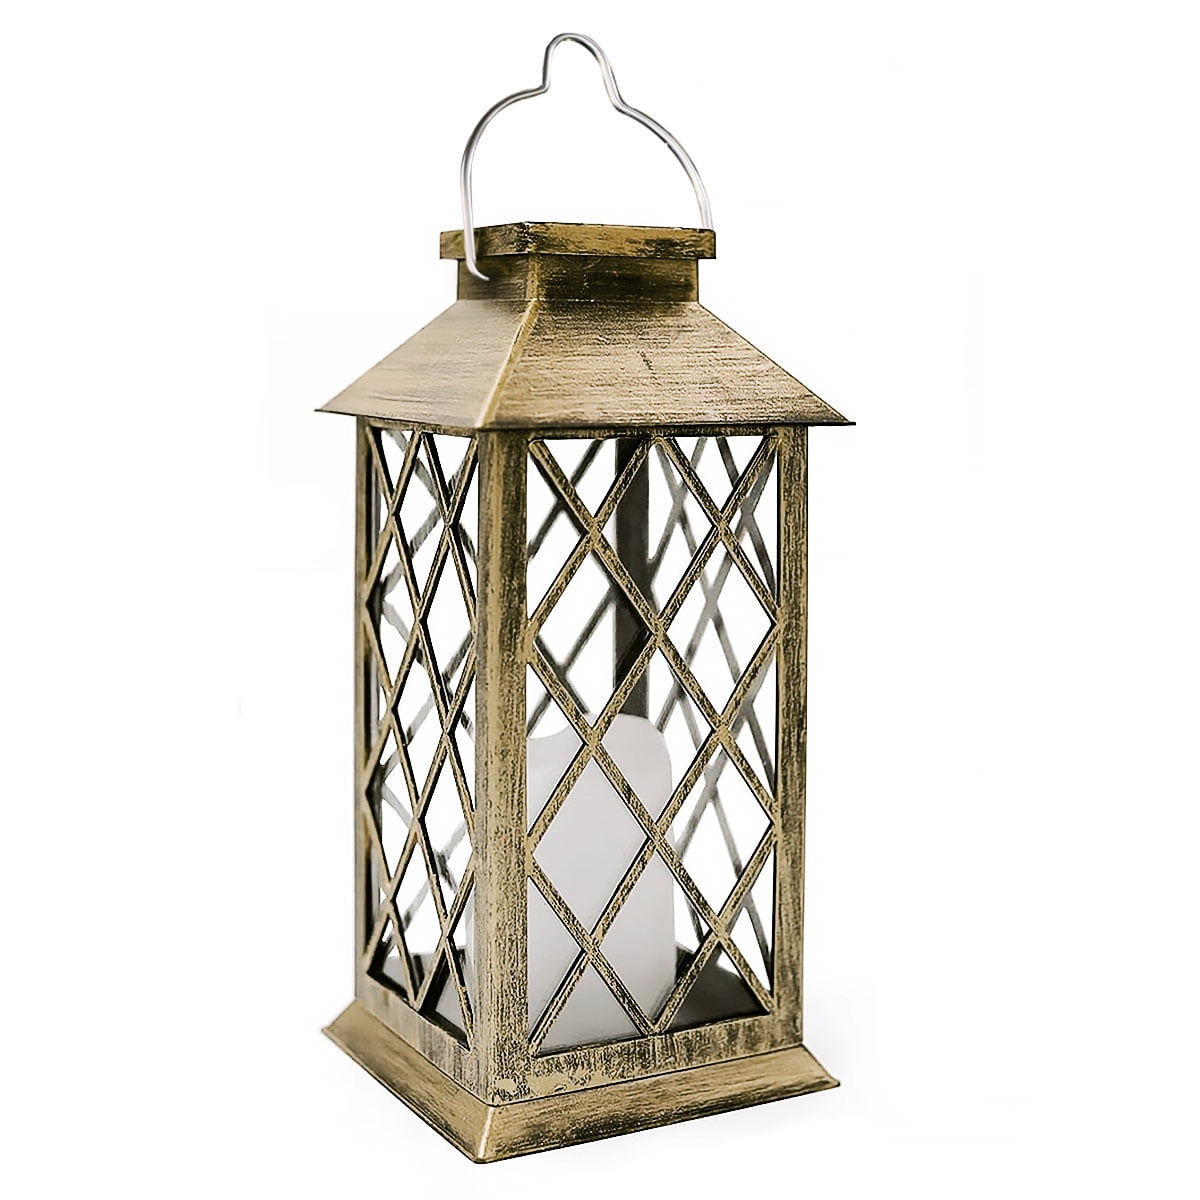 Details about   Hanging Solar Lights Sunklly Waterproof LED Outdoor Candle Lantern Decorated 